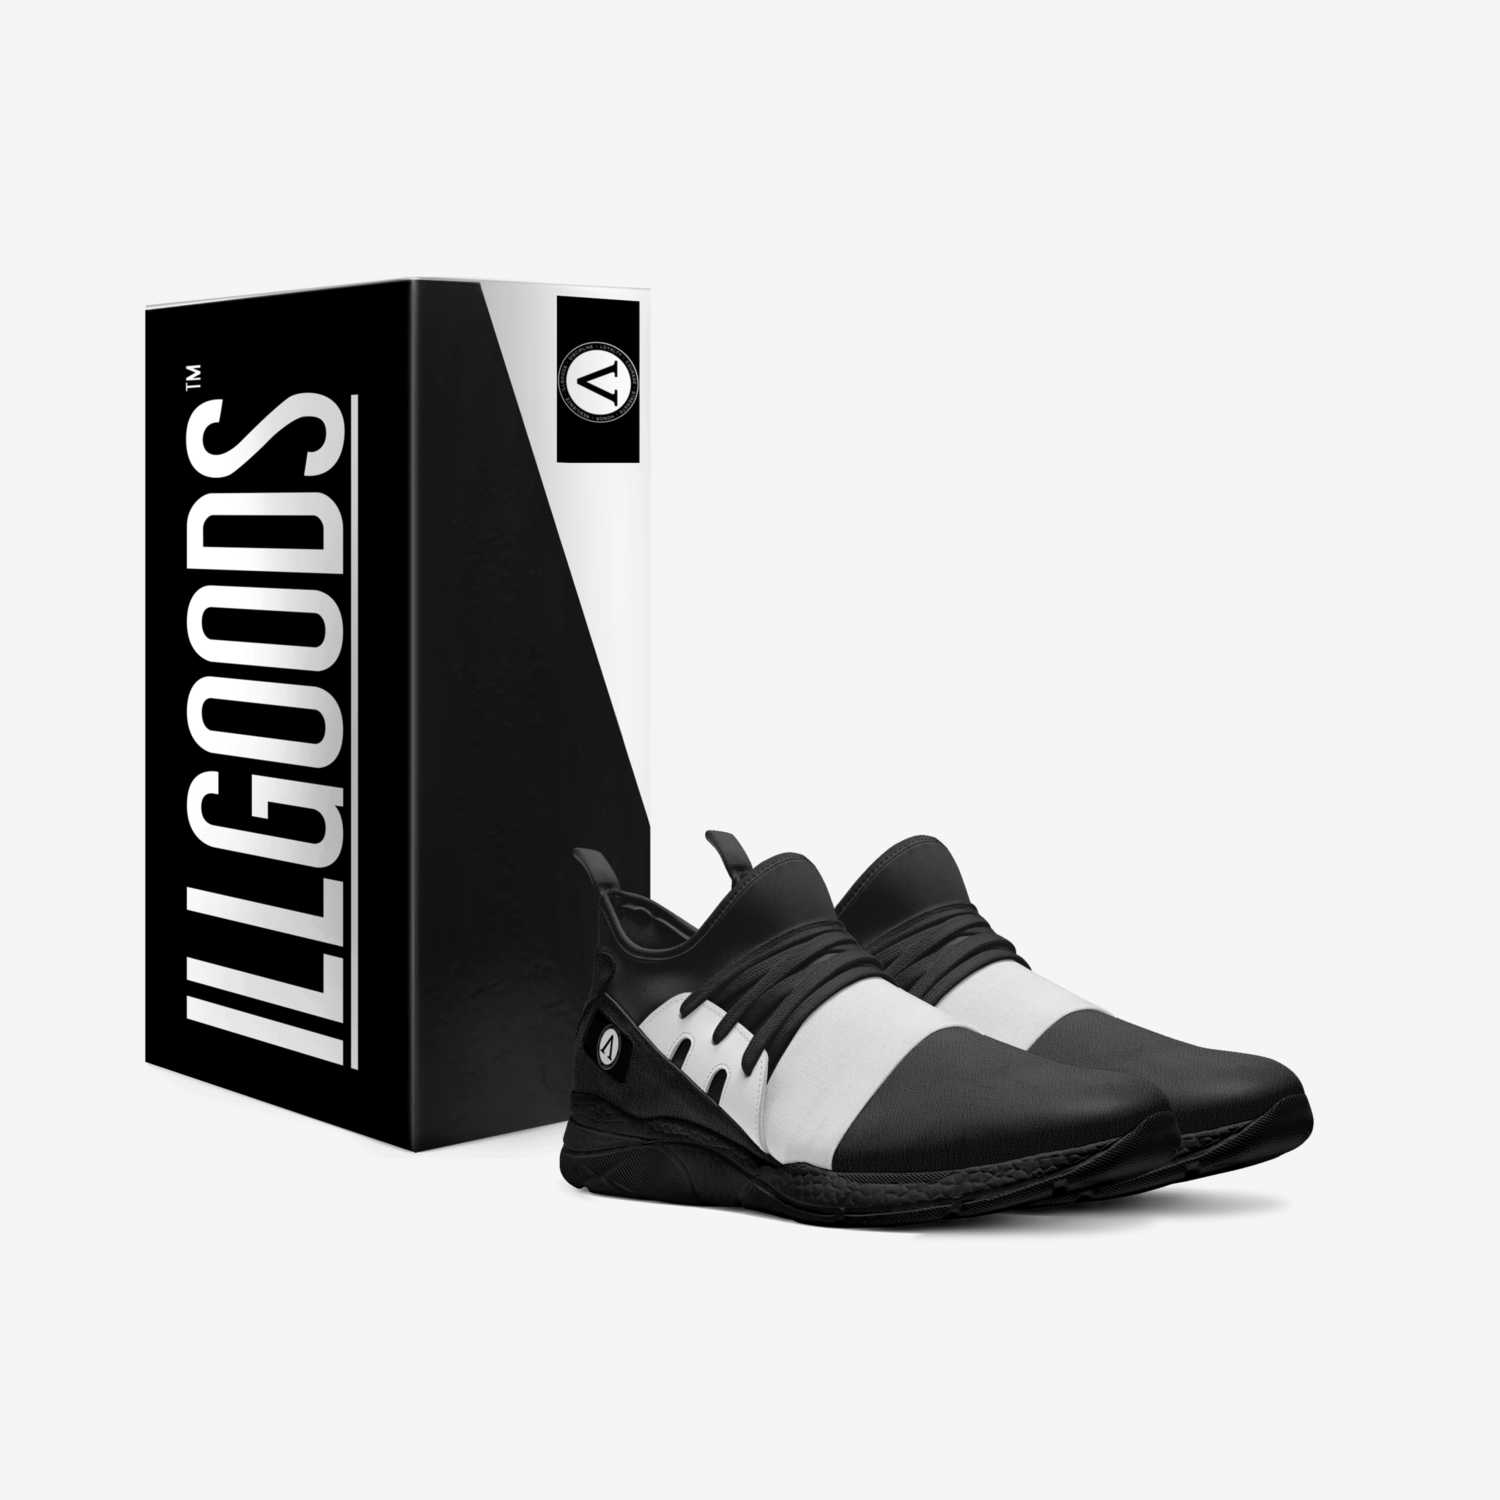 ILLGOODS custom made in Italy shoes by Λge Brown-hinds | Box view